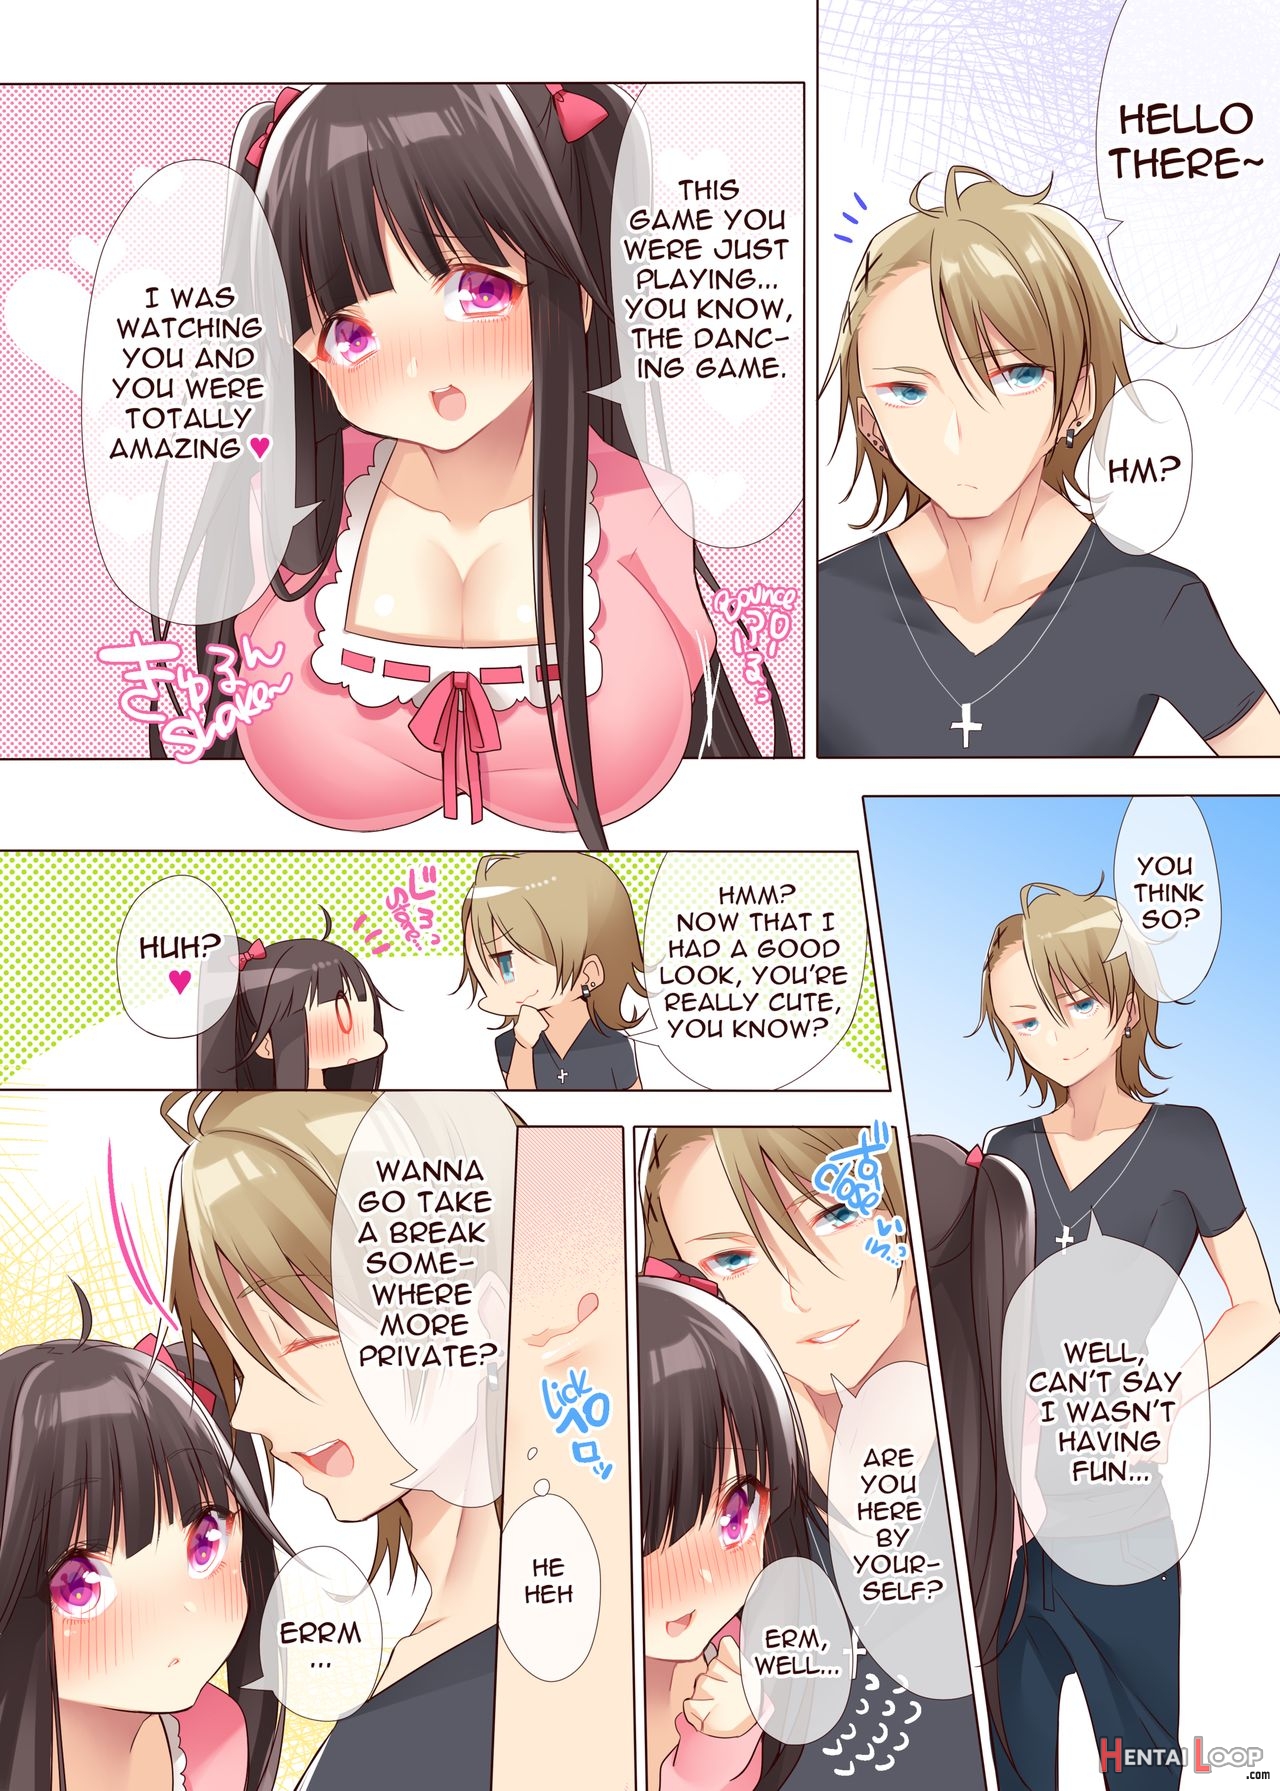 The Princess Of An Otaku Group Got Knocked Up By Some Piece Of Trash So She Let An Otaku Guy Do Her Too!? page 5